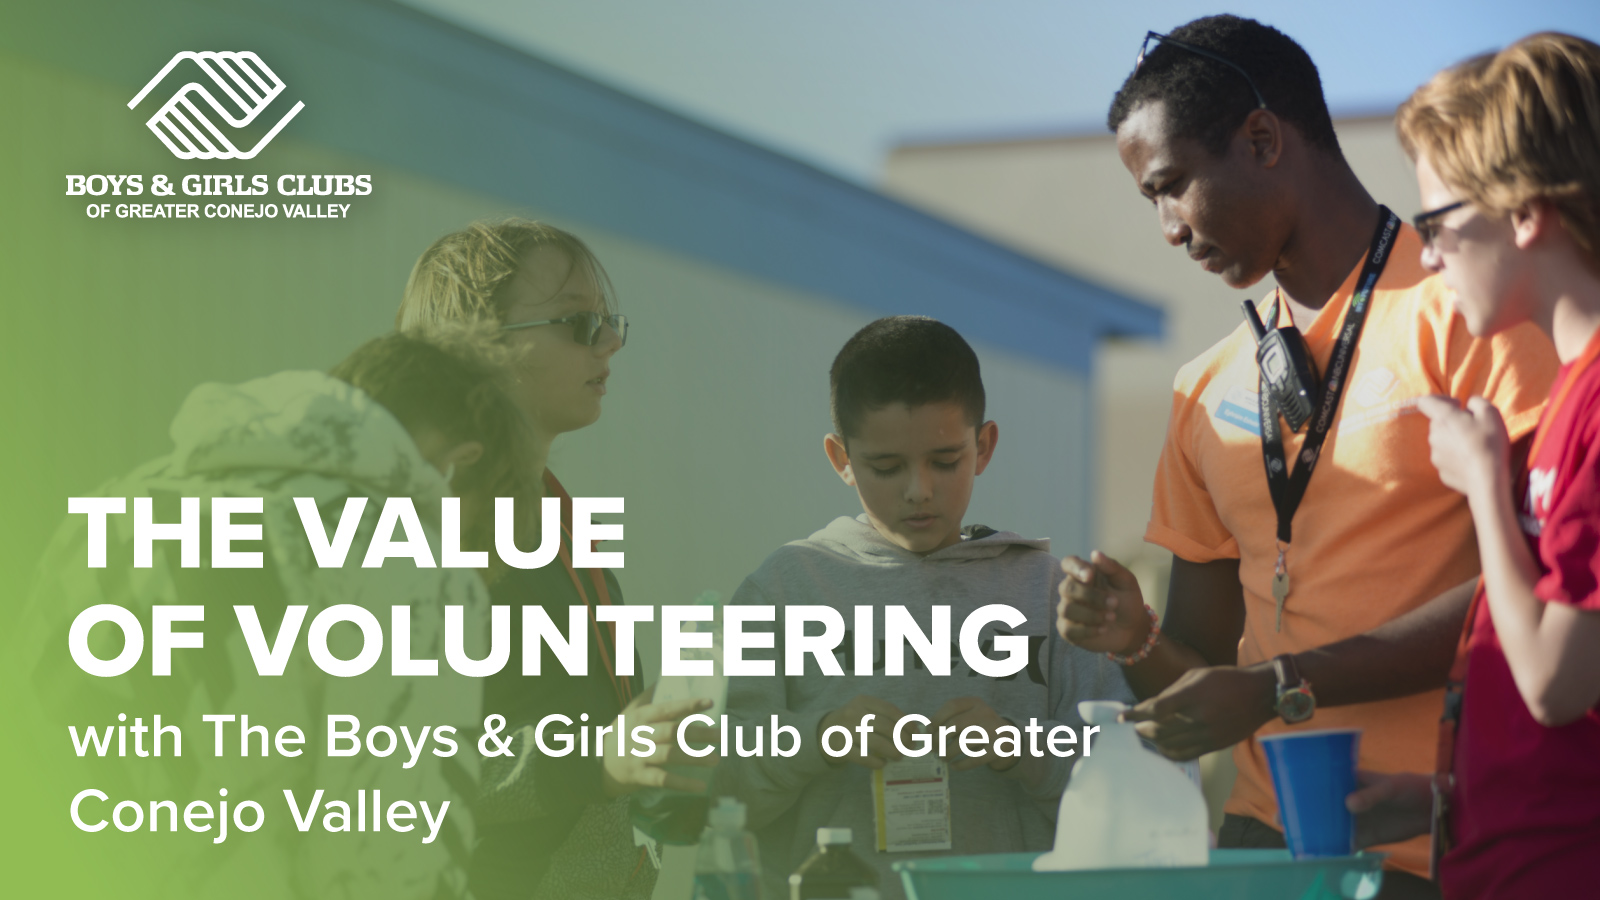 The Value of Volunteering at the Boys and Girls Clubs of Greater Conejo Valley